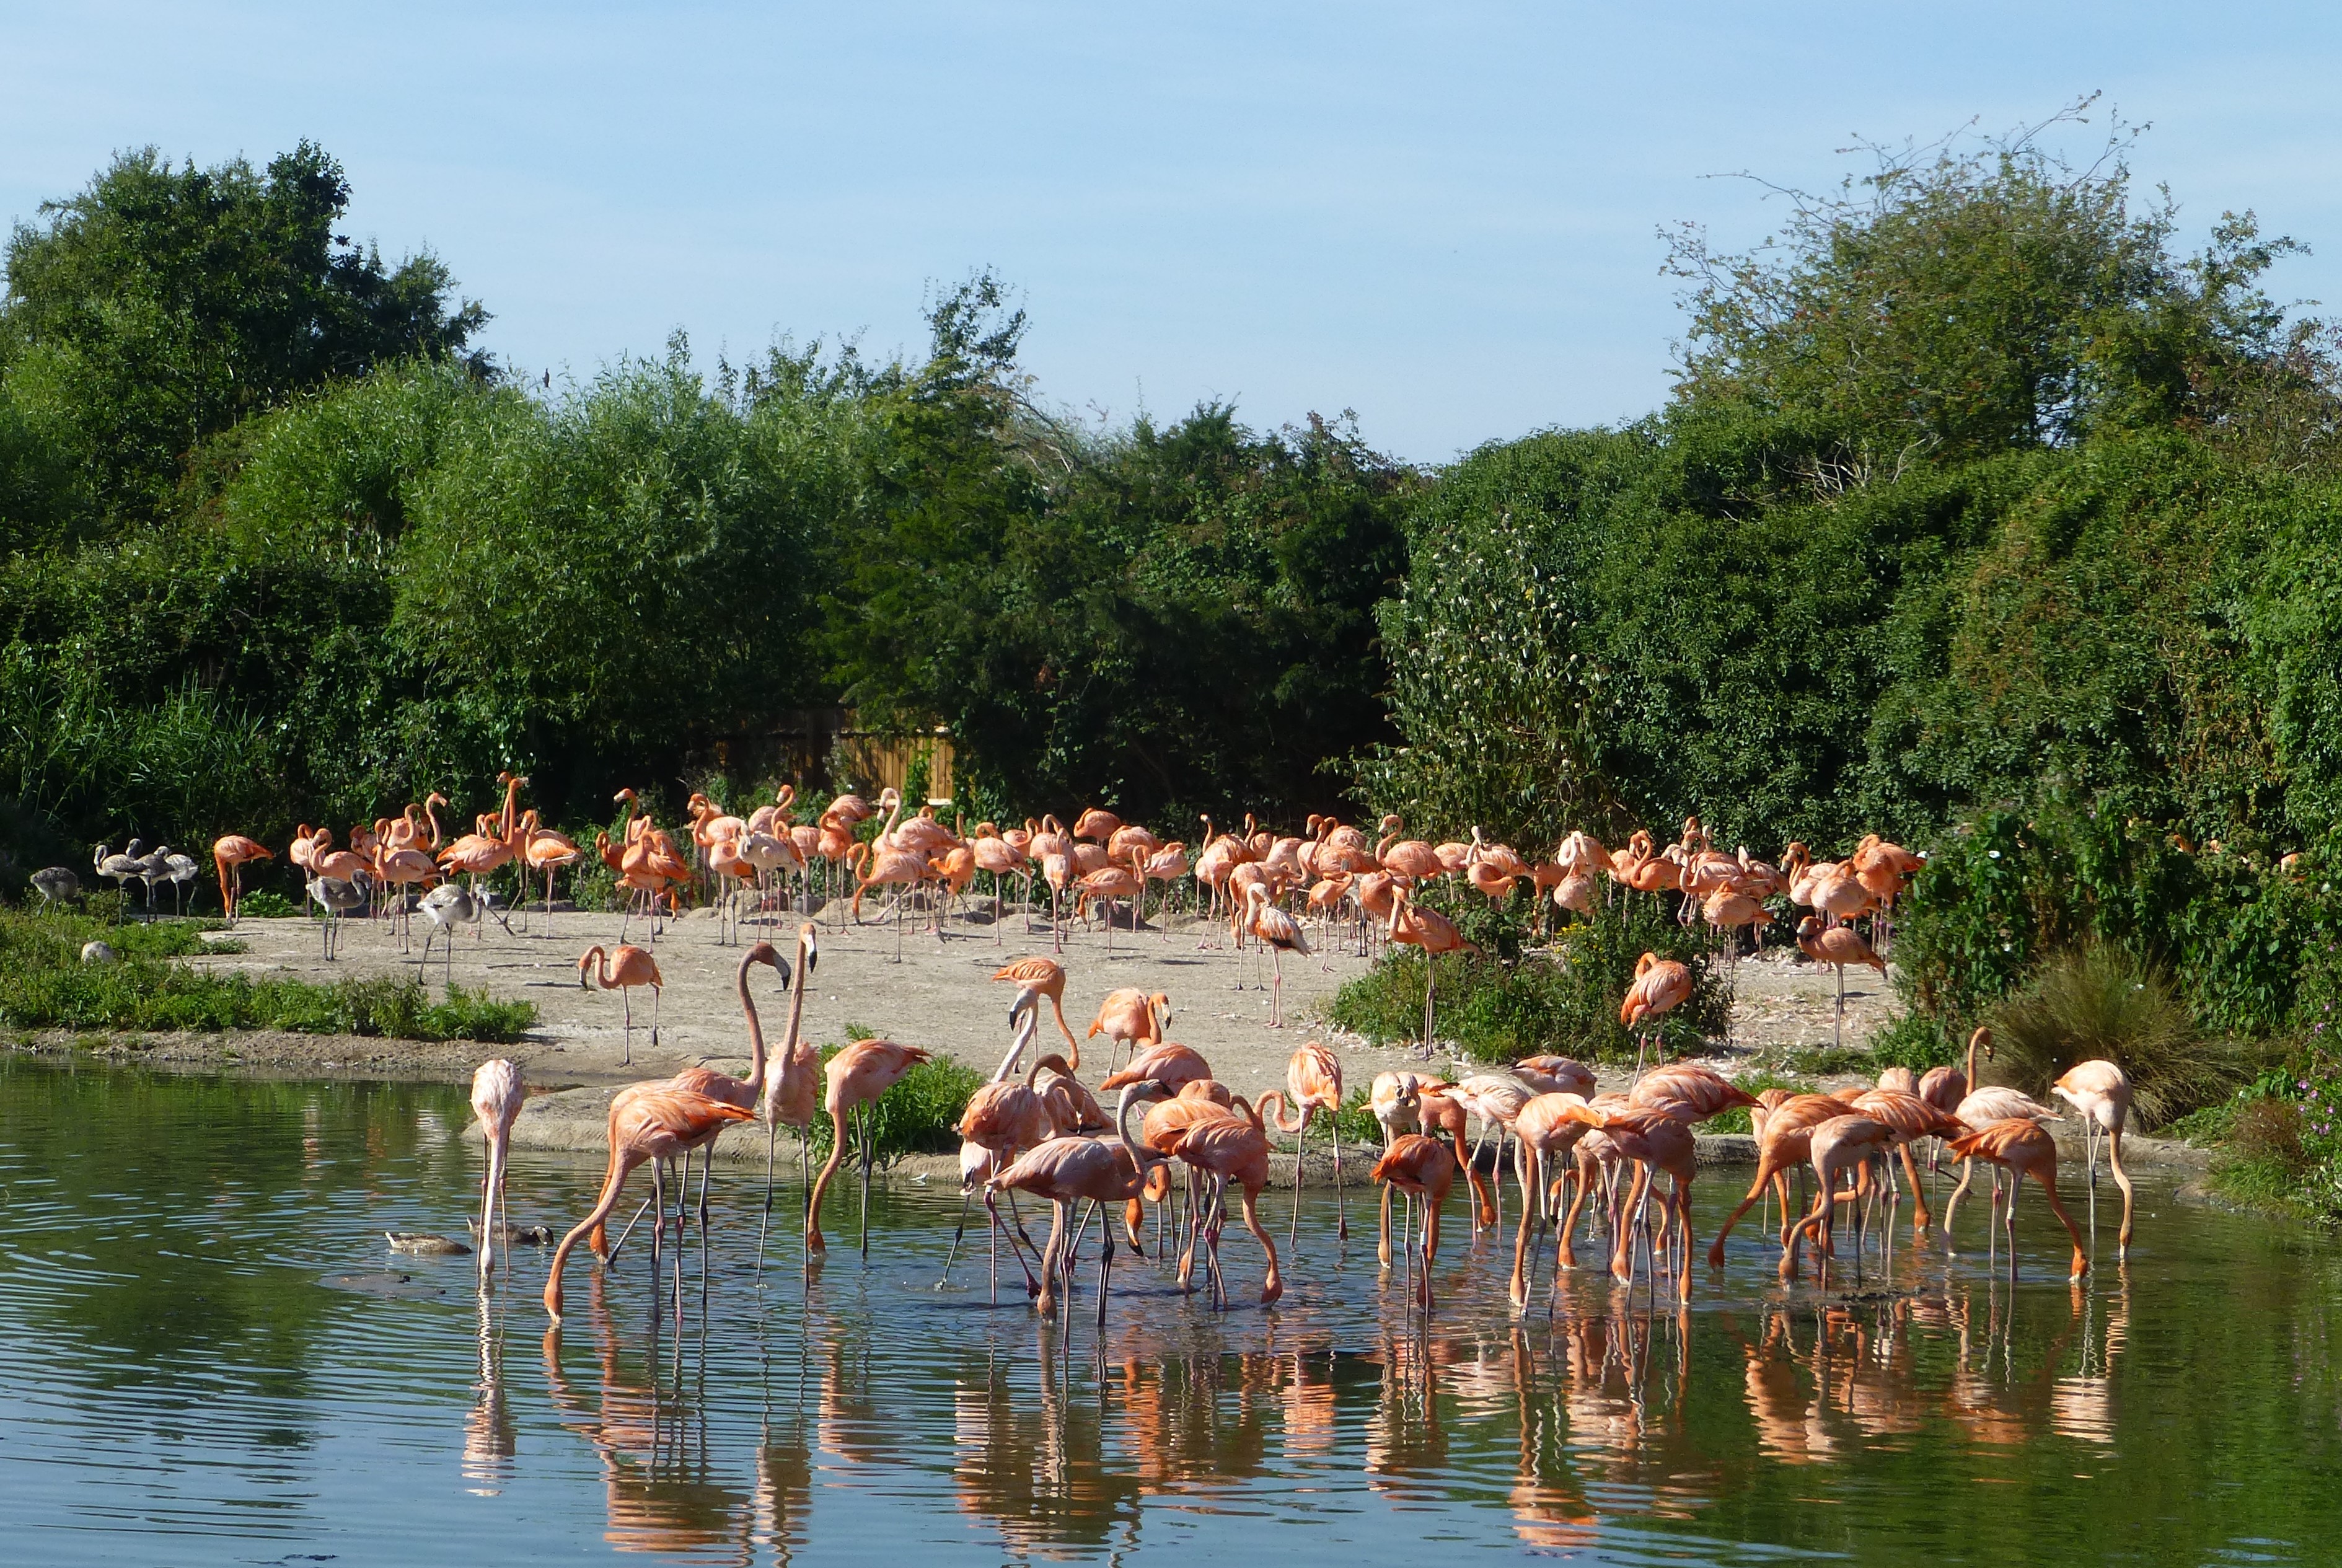 Summer time activity. Flamingos follow a similar behavioural pattern to most waterbirds, being most activity in the early morning to late afternoon. Visitors to Slimbridge that are taking advatange of the long summer days, will see the birds closer up towards the end of the day.